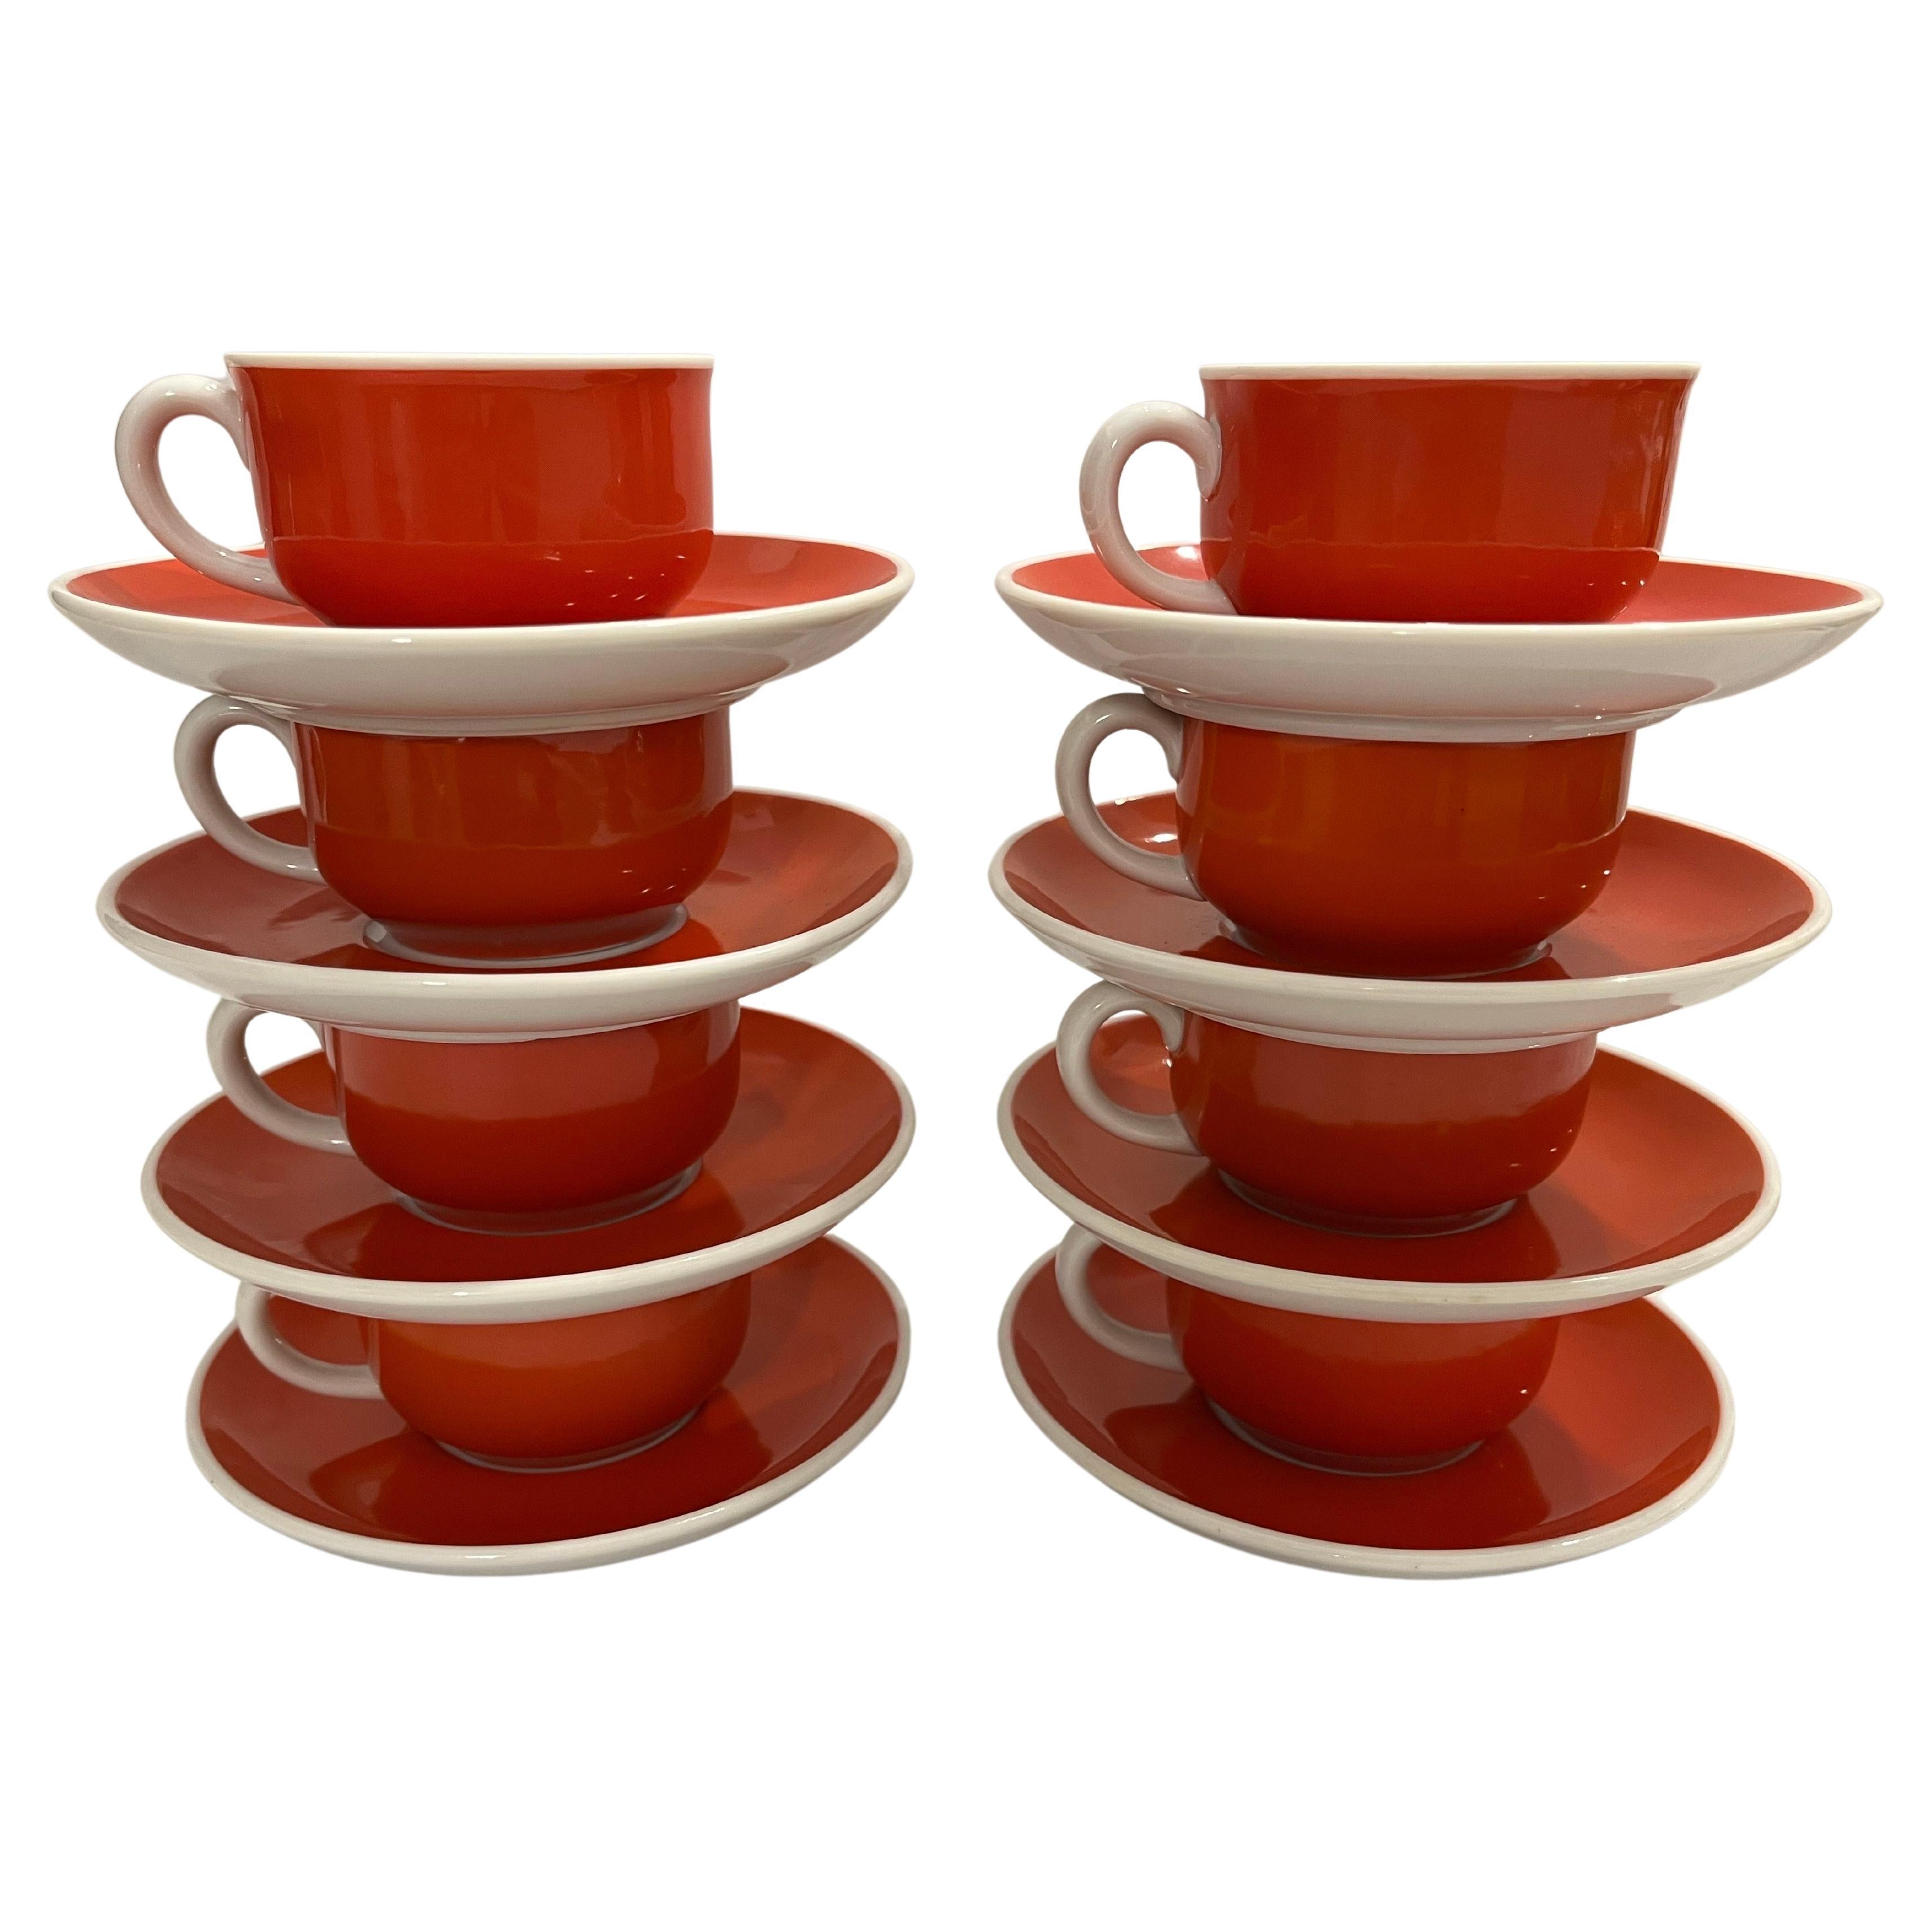 https://a.1stdibscdn.com/ed-langbein-and-richard-ginori-italian-espresso-cups-and-saucers-set-of-eight-for-sale/f_72402/f_360919221694346850912/f_36091922_1694346852622_bg_processed.jpg